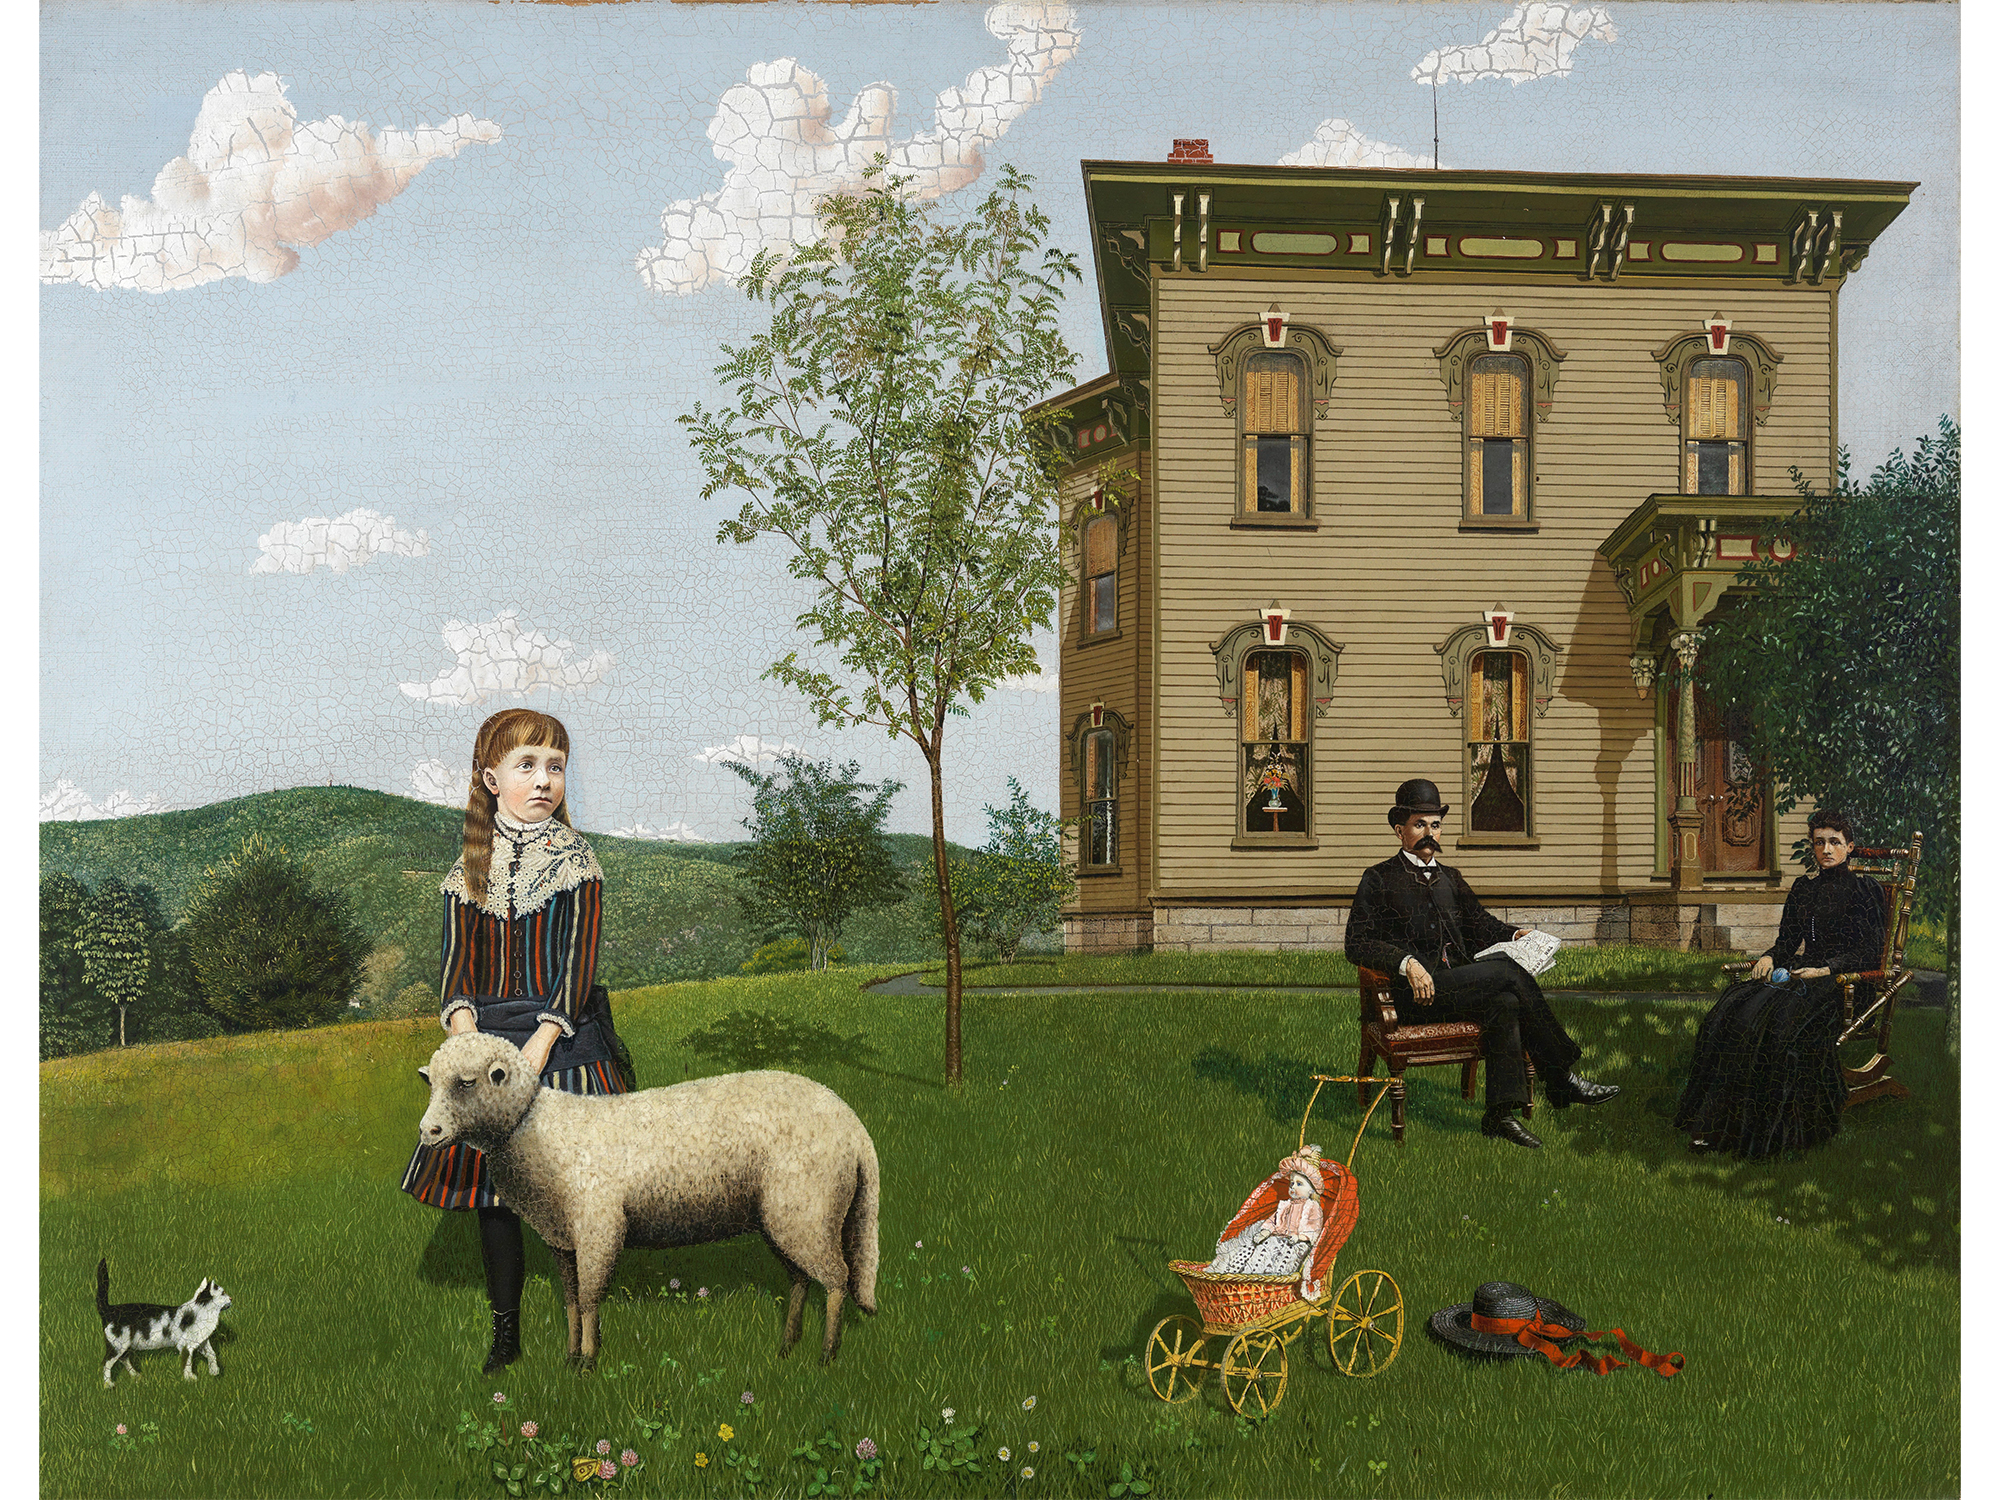 Painting of little girl standing with a sheep in the front yard of an old house with two adults sitting in chairs behind her in the yard